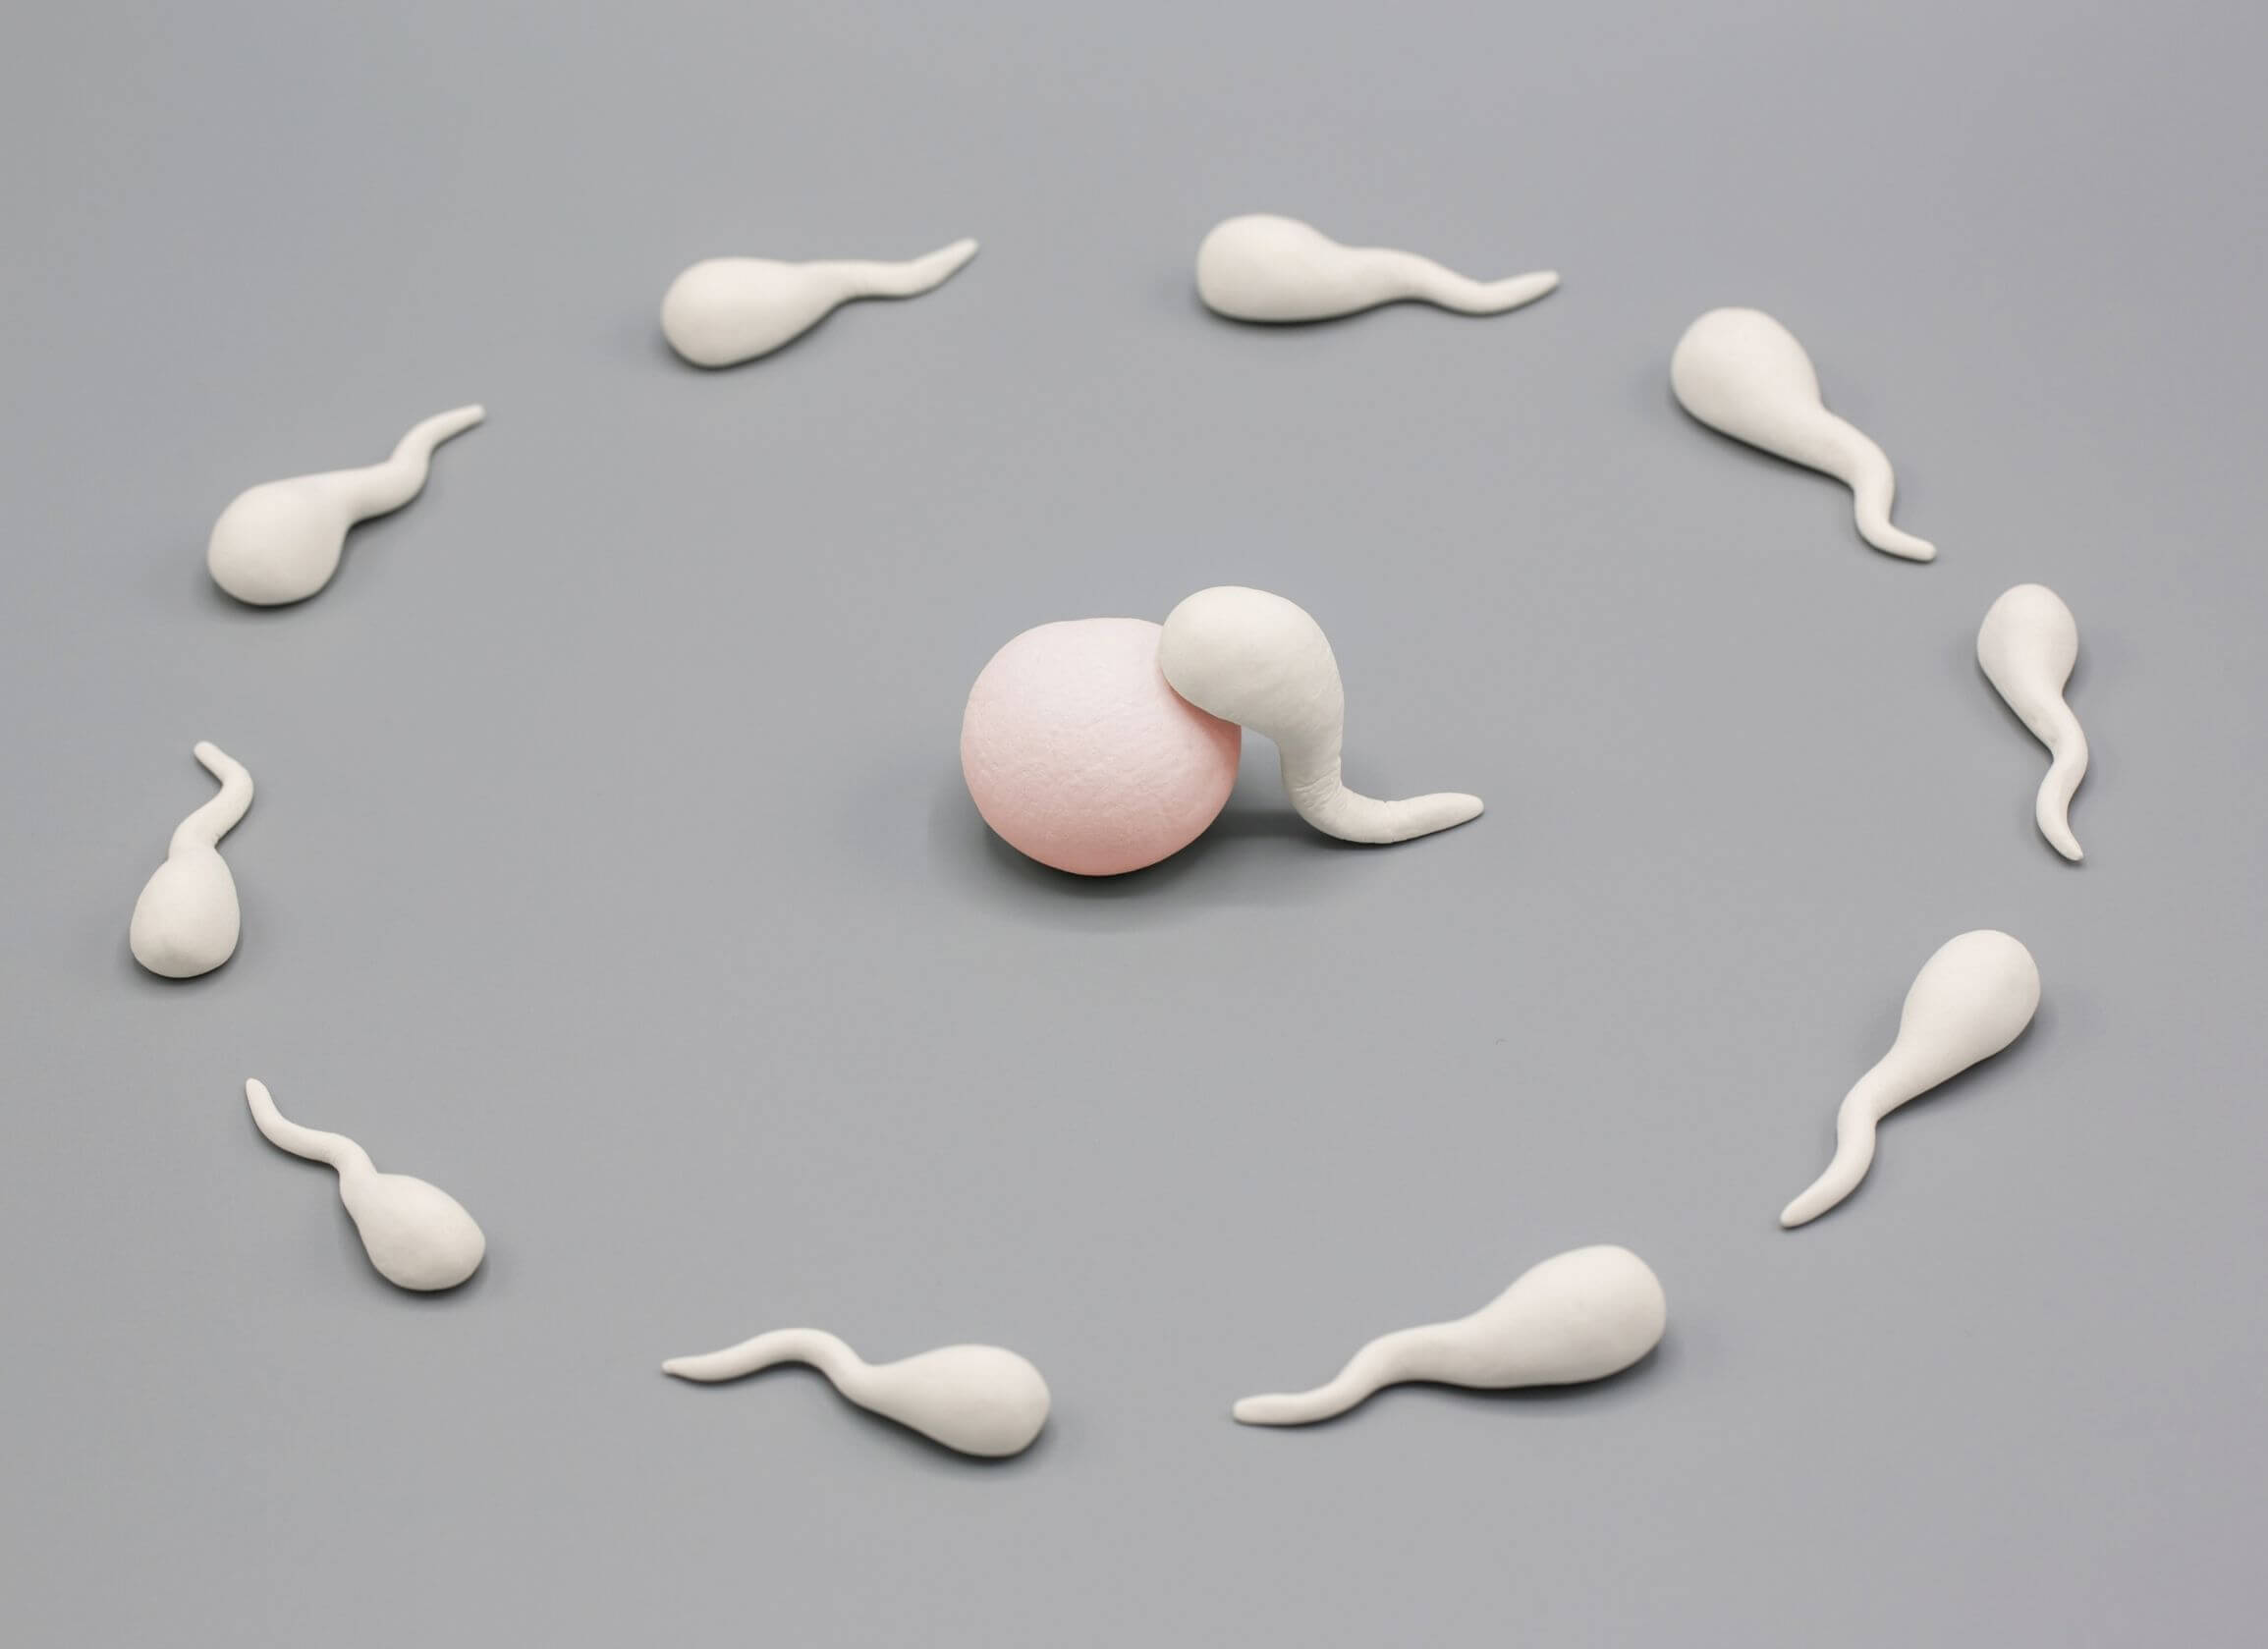 Does Releasing Sperm Affect Muscle Growth? pic